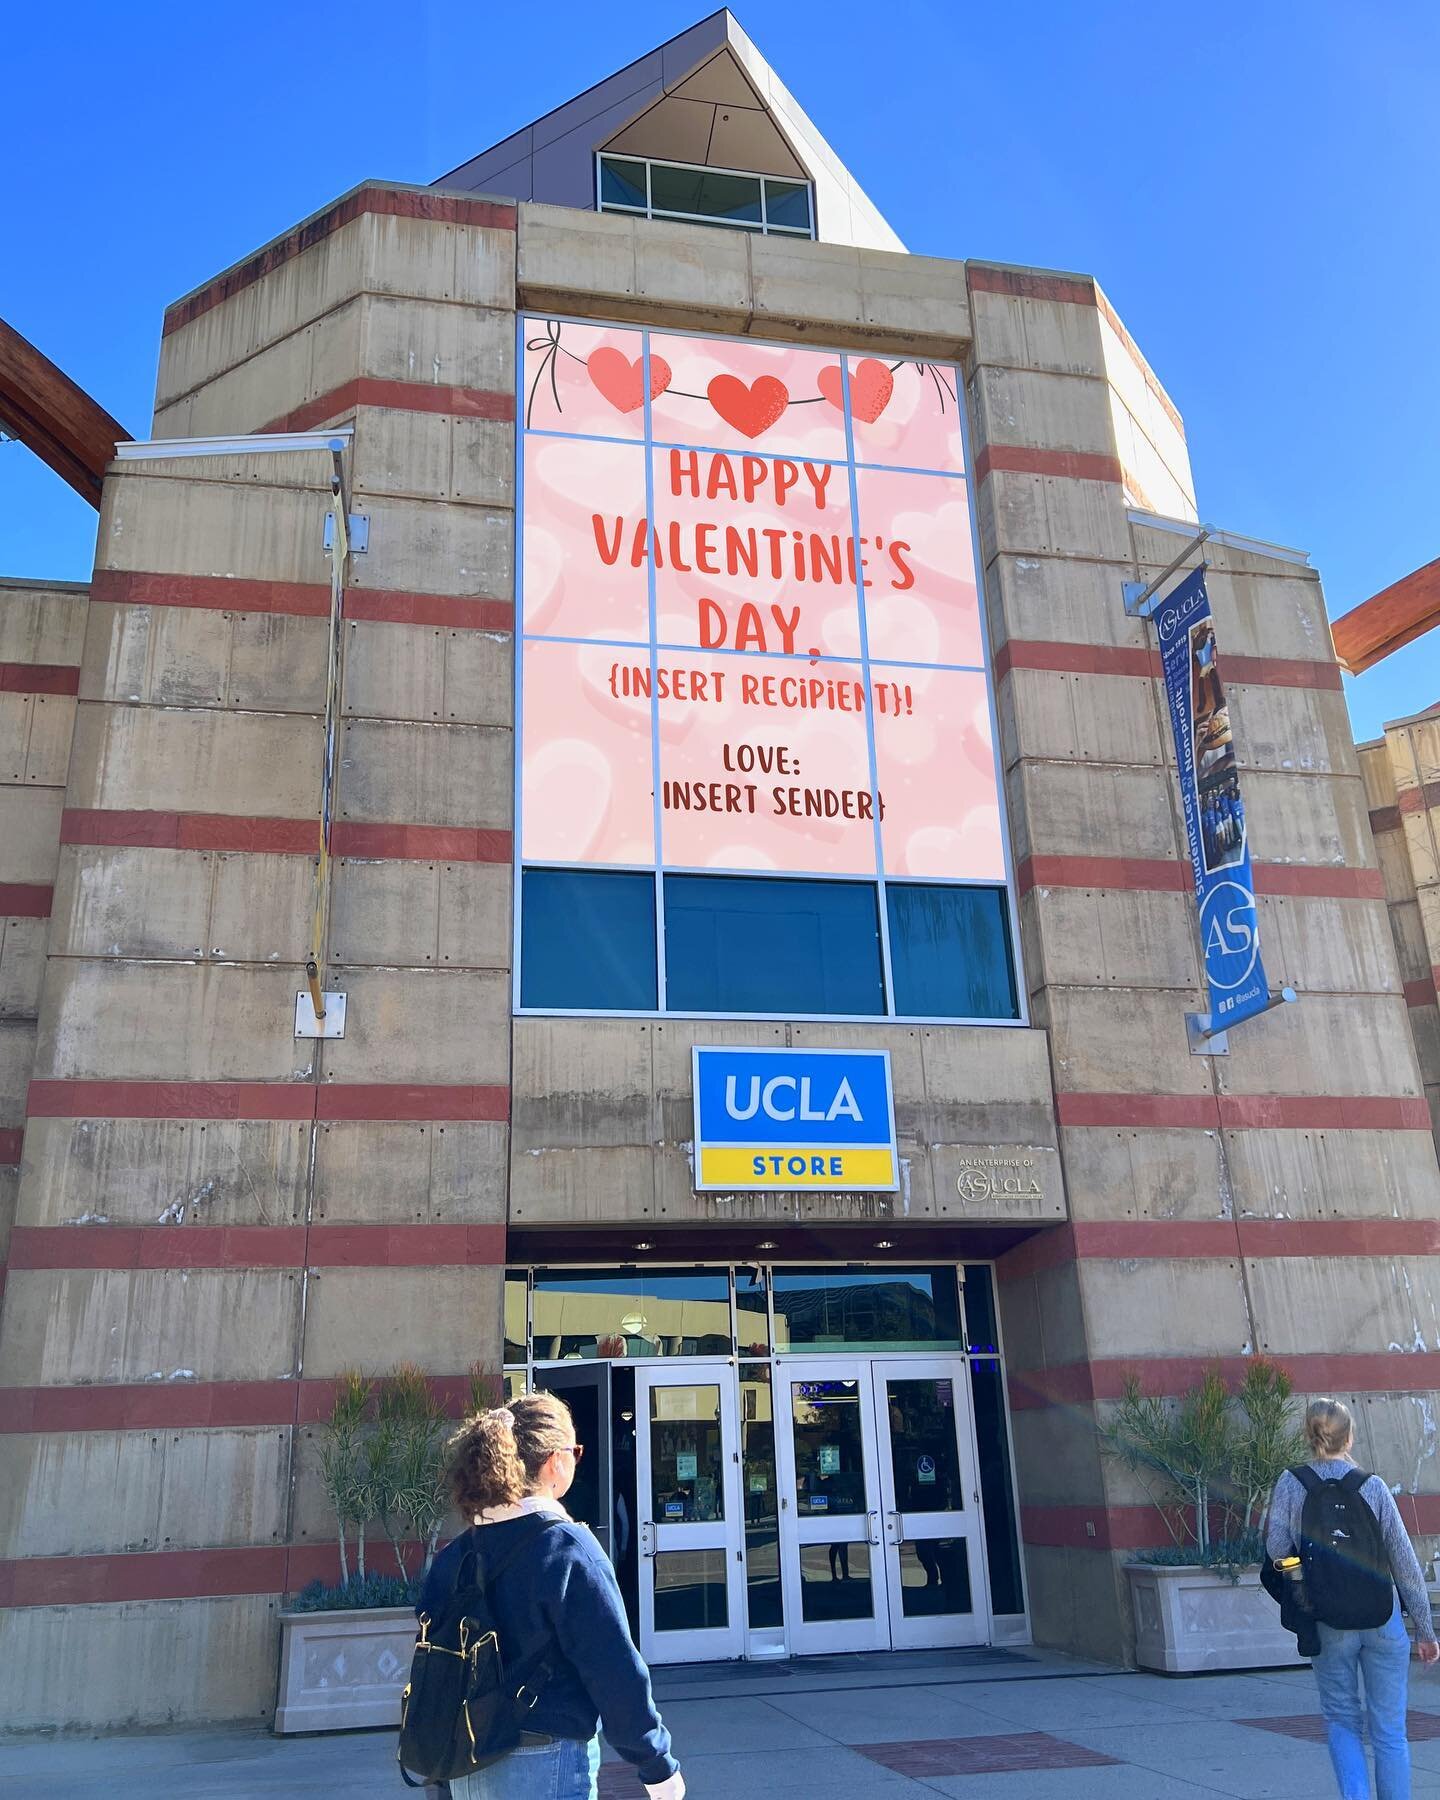 Spread the love this year by sending a Valentine's Gram to a friend or loved one 💕 Your message will be displayed on the digital sign above the UCLA Store on V-day! The deadline to purchase a Valentine's Gram is Tuesday, February 7th. 💝✨ 
 
Swipe f